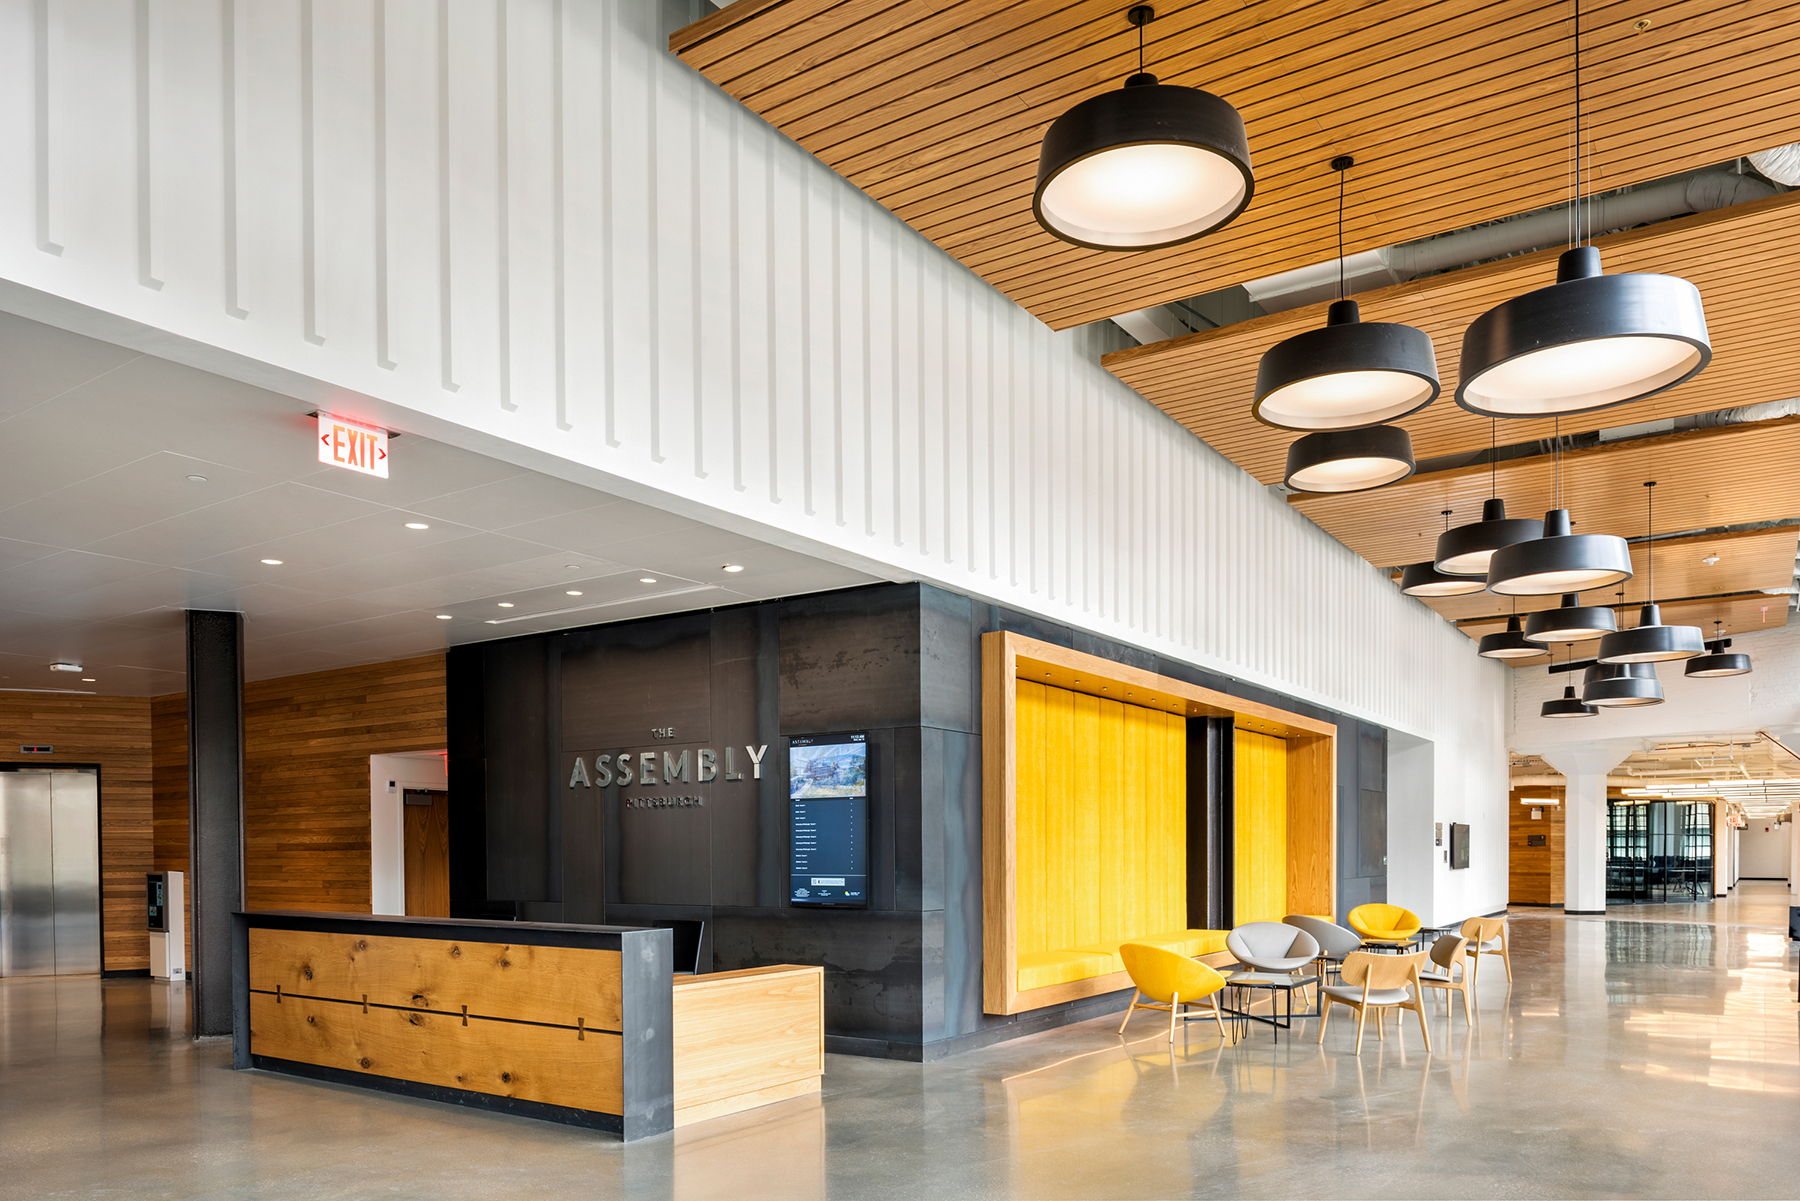 The lobby of the new building. (Courtesy Triggs Photography)